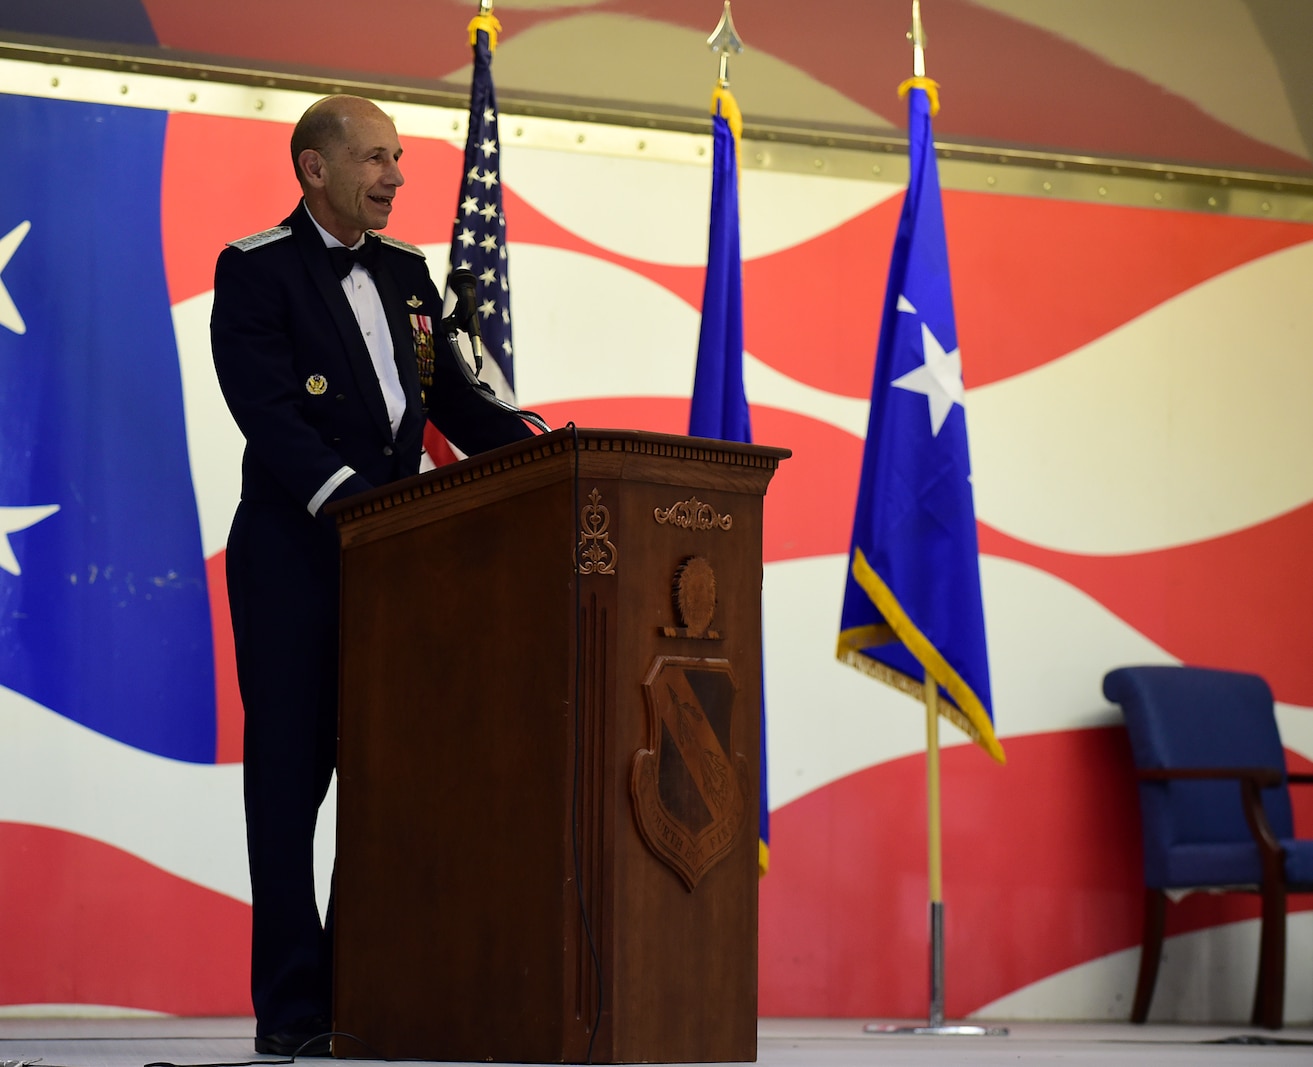 Gen. Mike Holmes, commander of Air Combat Command, delivers a speech during the 4th Fighter Wing 75th Anniversary Gala, Sept. 16, 2017, at Seymour Johnson Air Force Base, North Carolina. Holmes served as the 4 FW commander from Aug. 2004 through Sept. 2006. (U.S. Air Force photo by Airman 1st Class Kenneth Boyton)